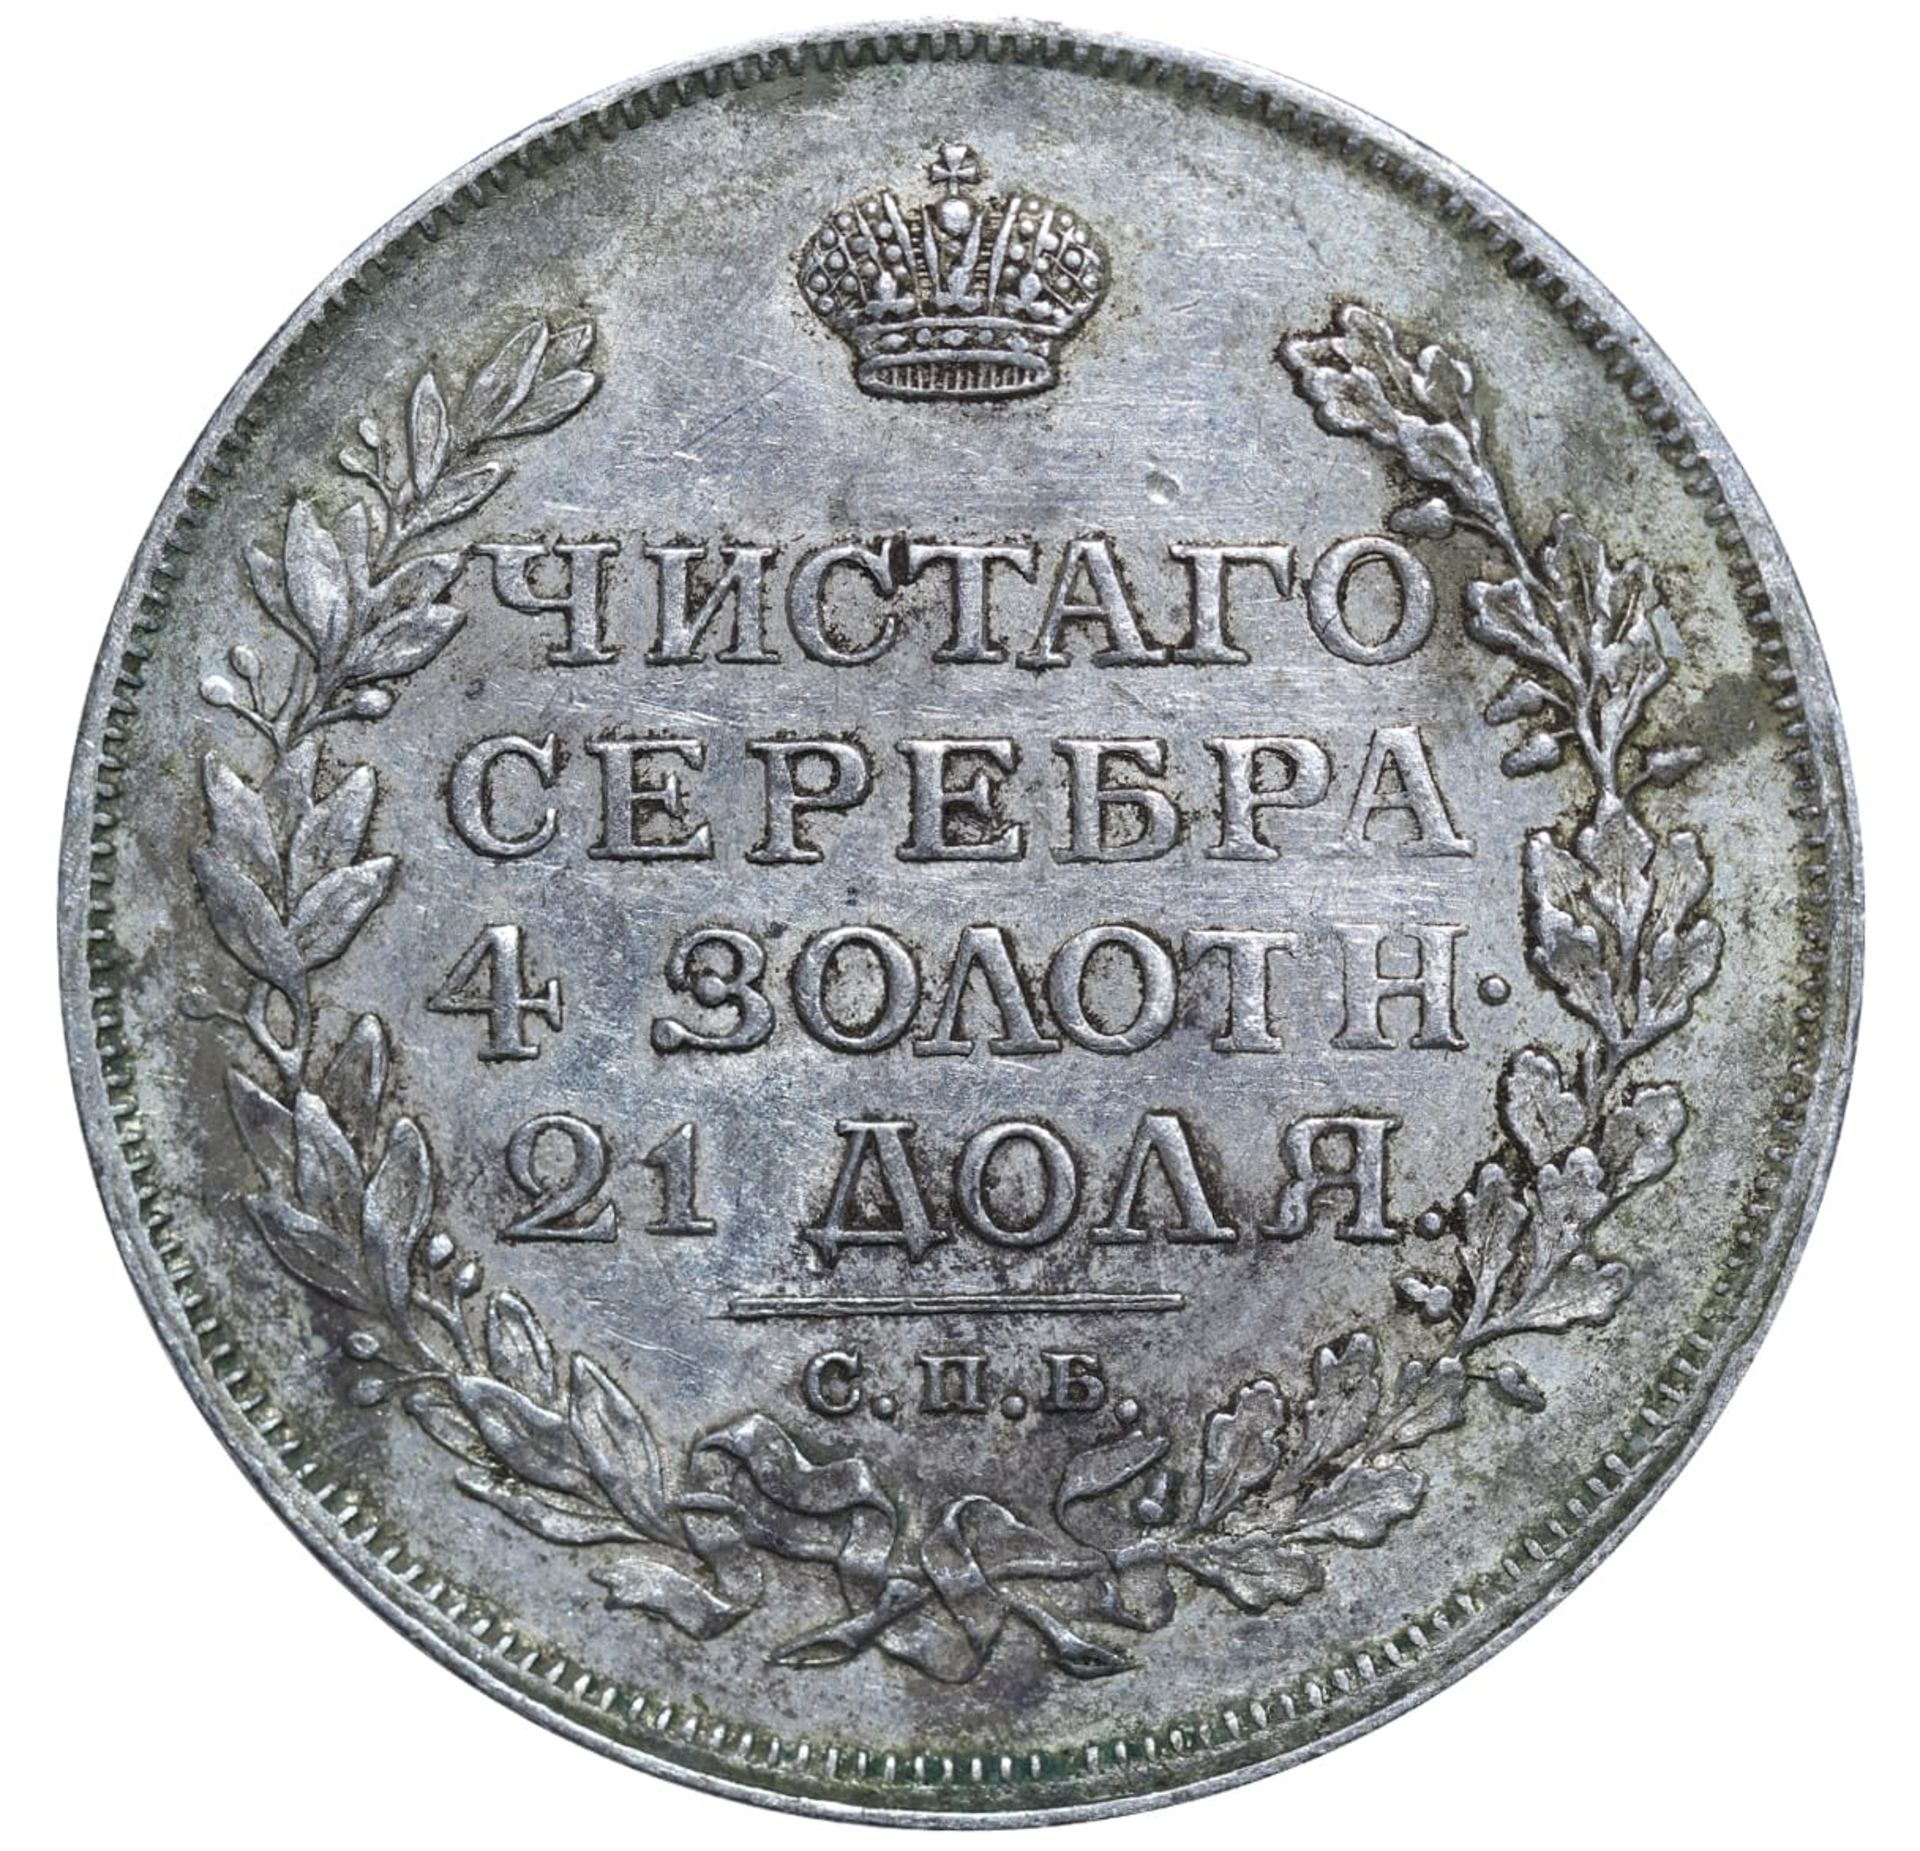 Russian Empire, 1 Rouble, 1814 year, SPB-MF - Image 2 of 3